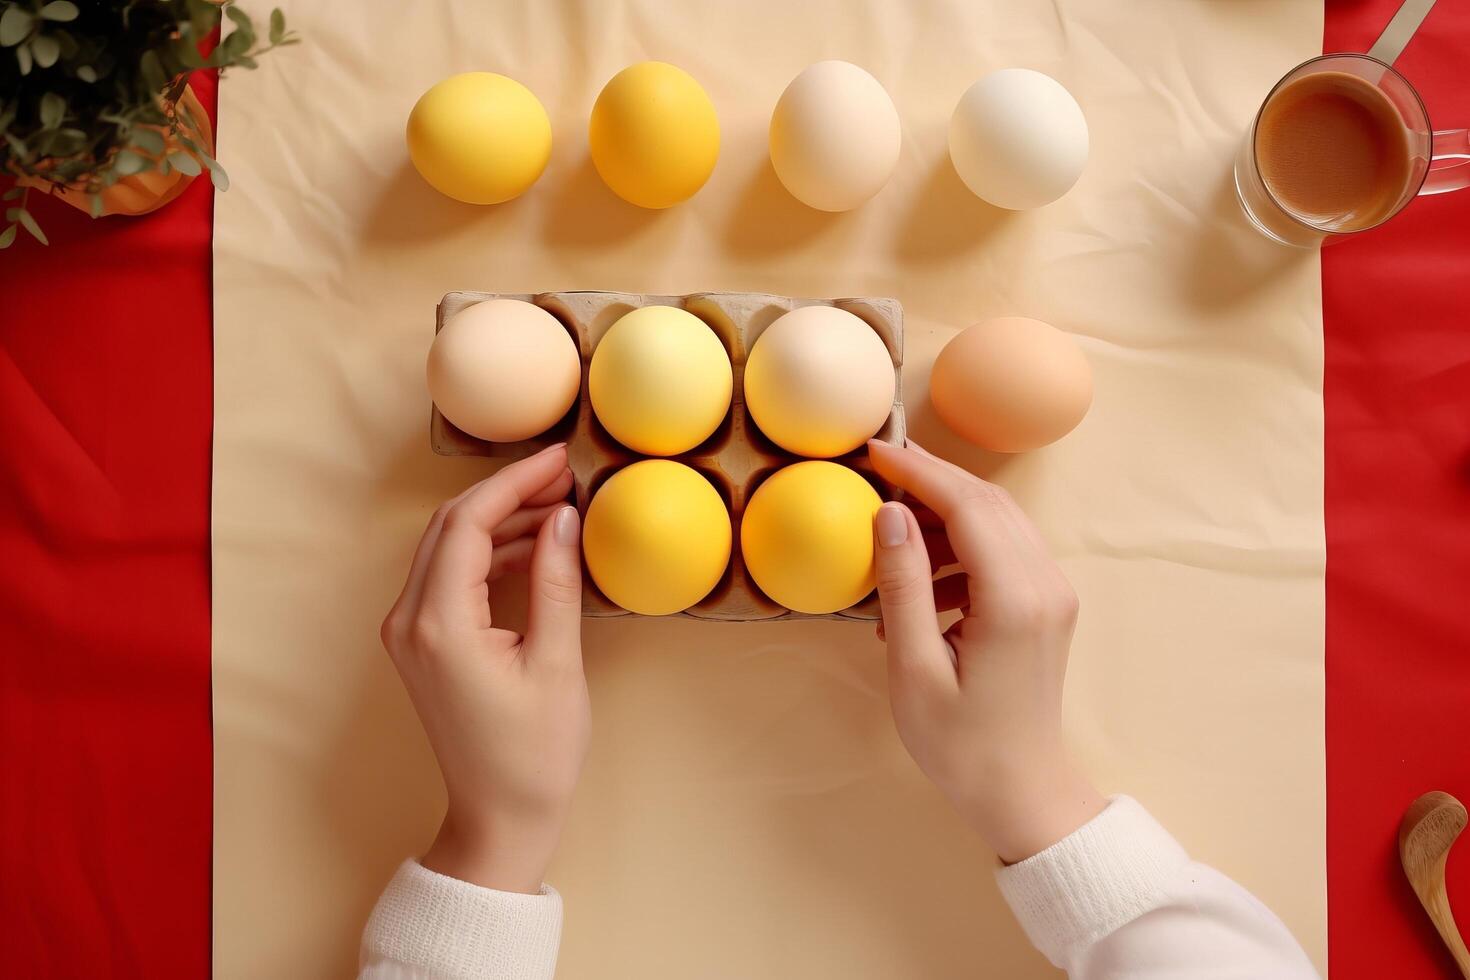 Persons hand holds a carton of eggs on table for cooking event photo